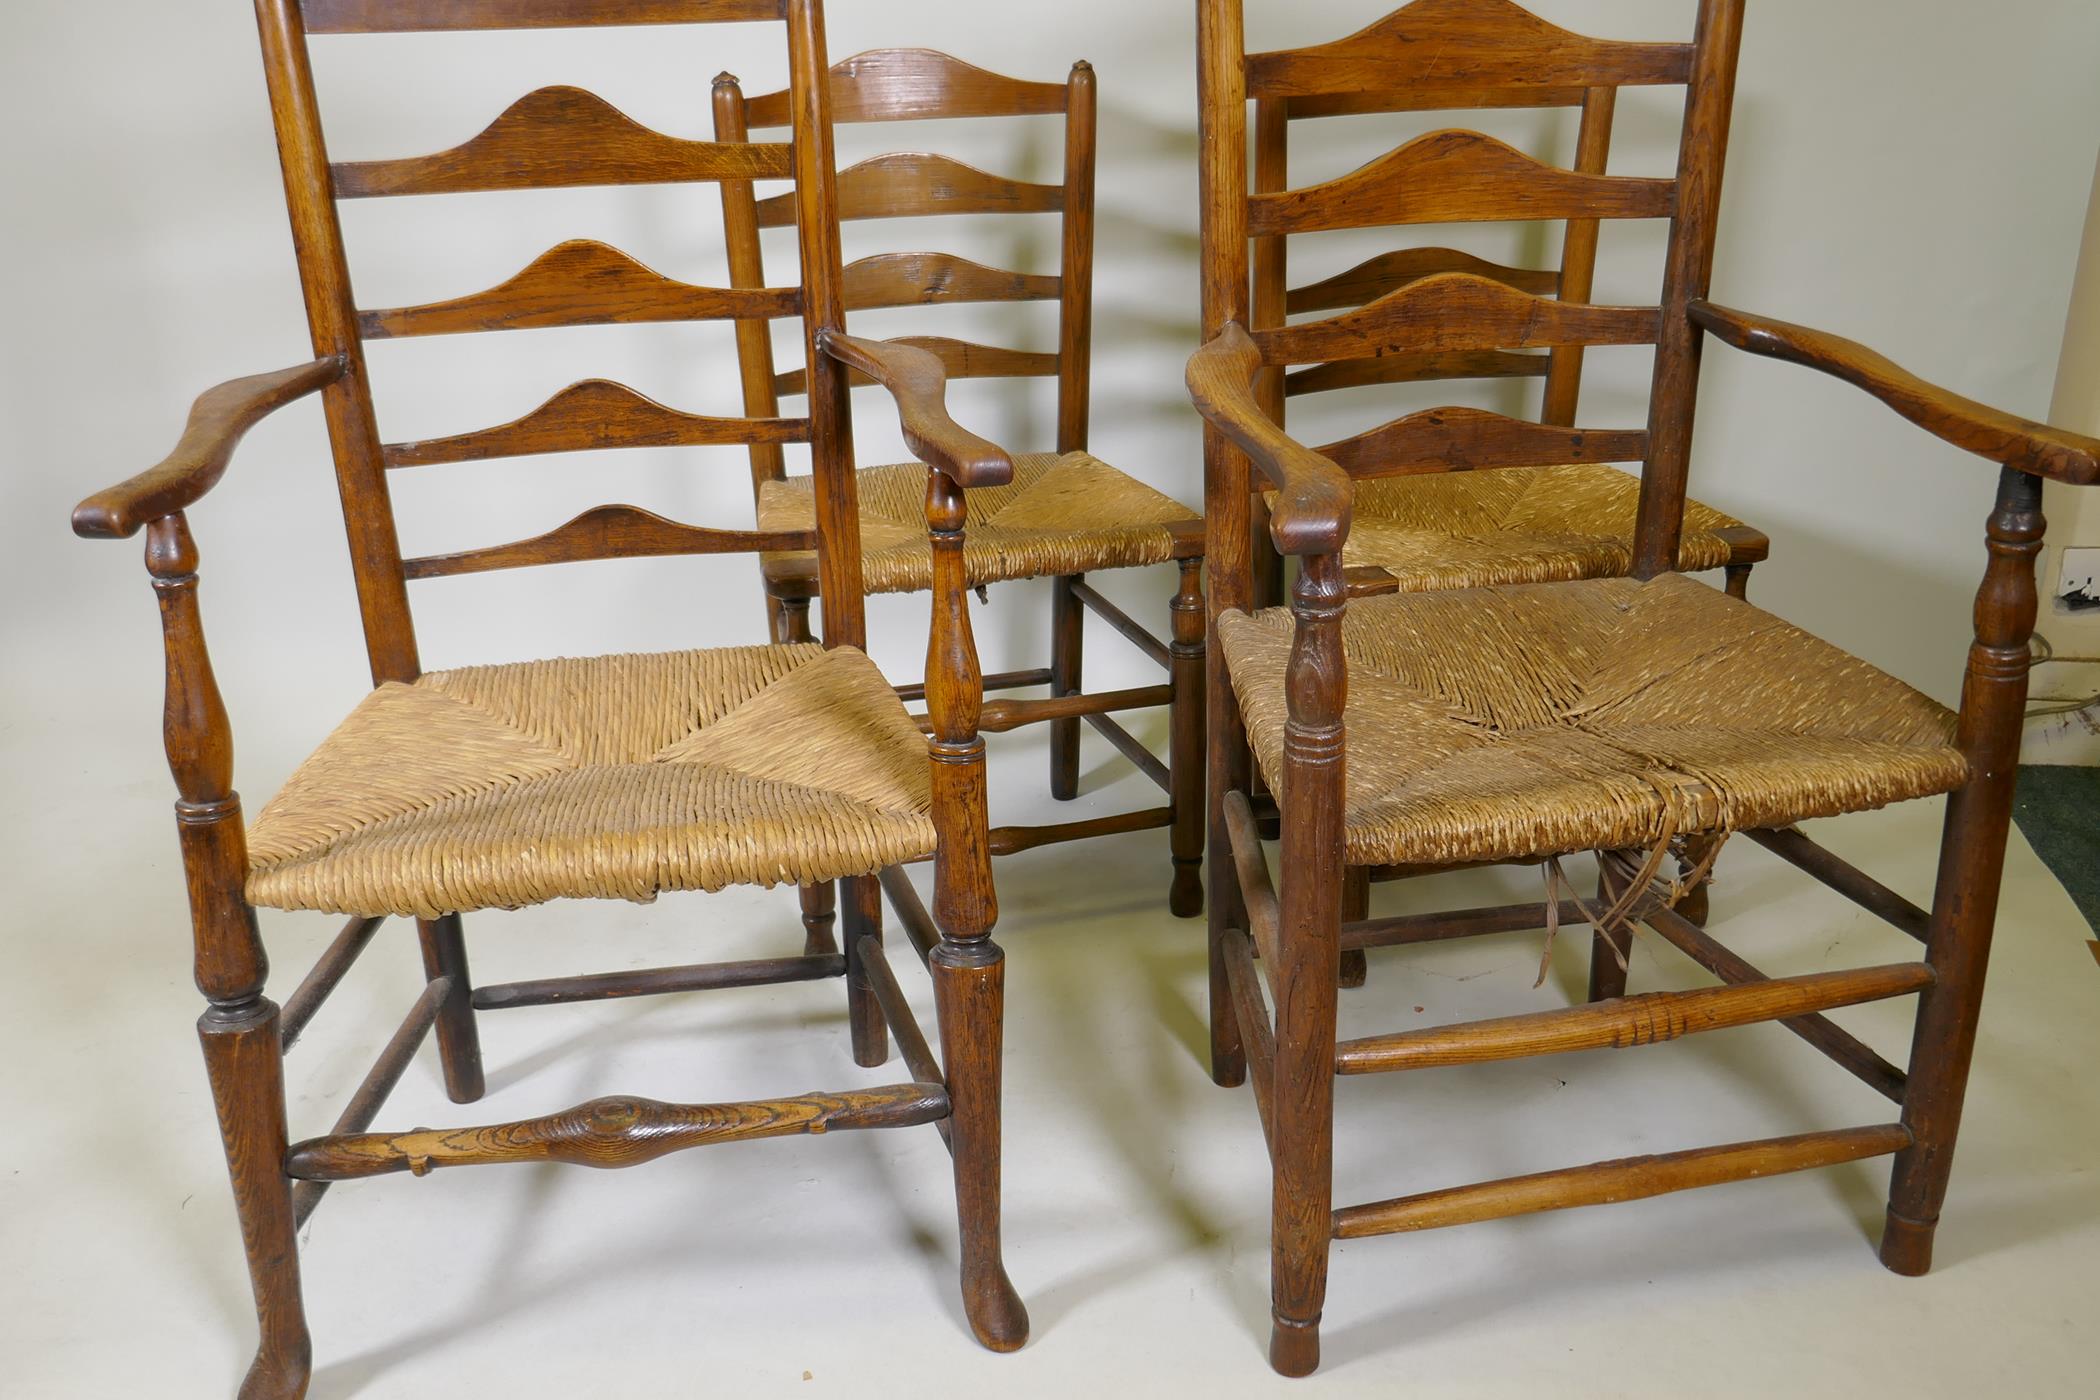 A set of six (4+2) ash ladderback chairs with rush seats, late C18th/early C19th - Image 3 of 4